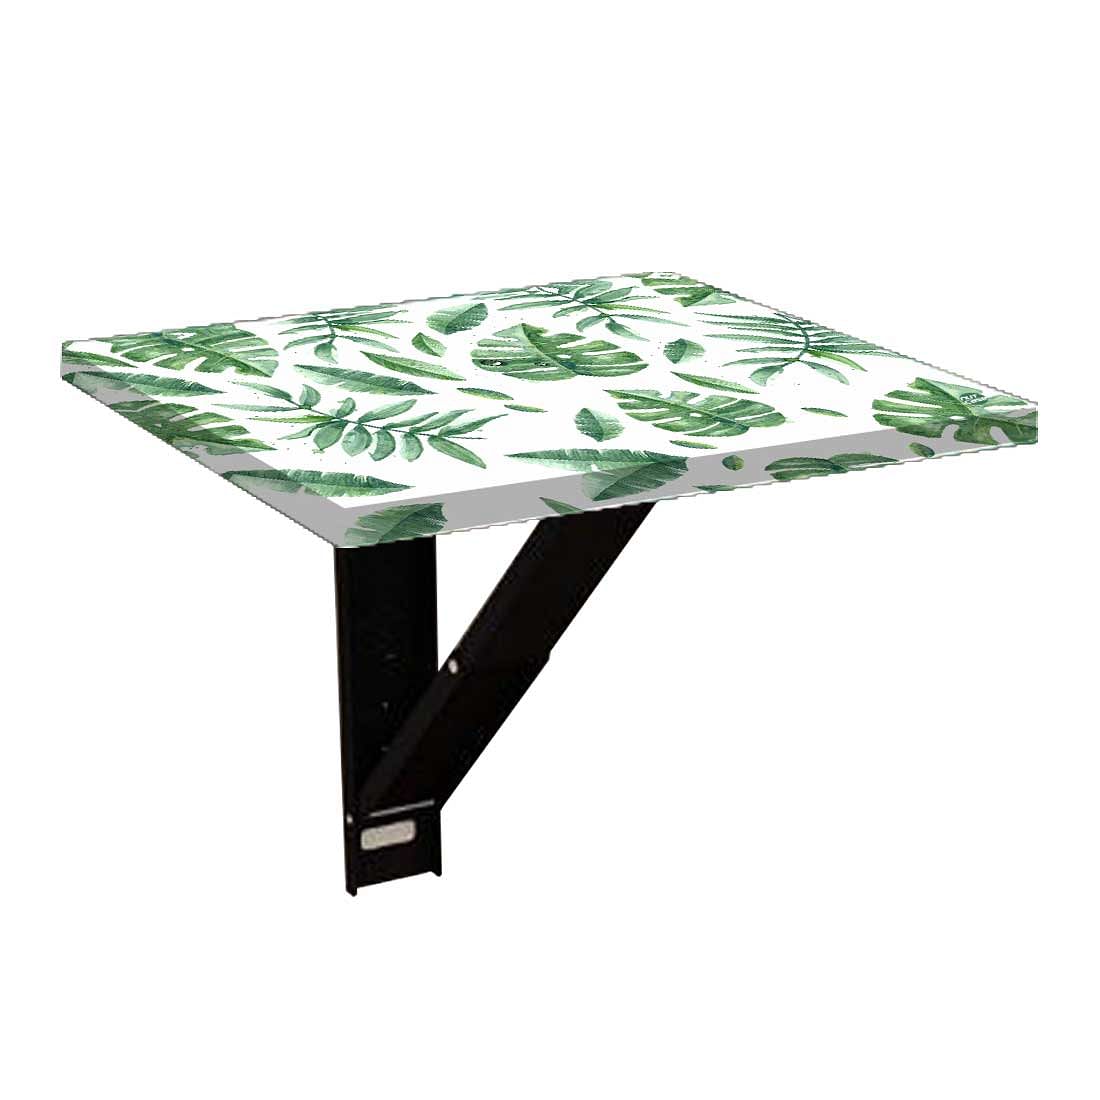 Folding Side Table for Bedroom - Leaves with Drops Nutcase